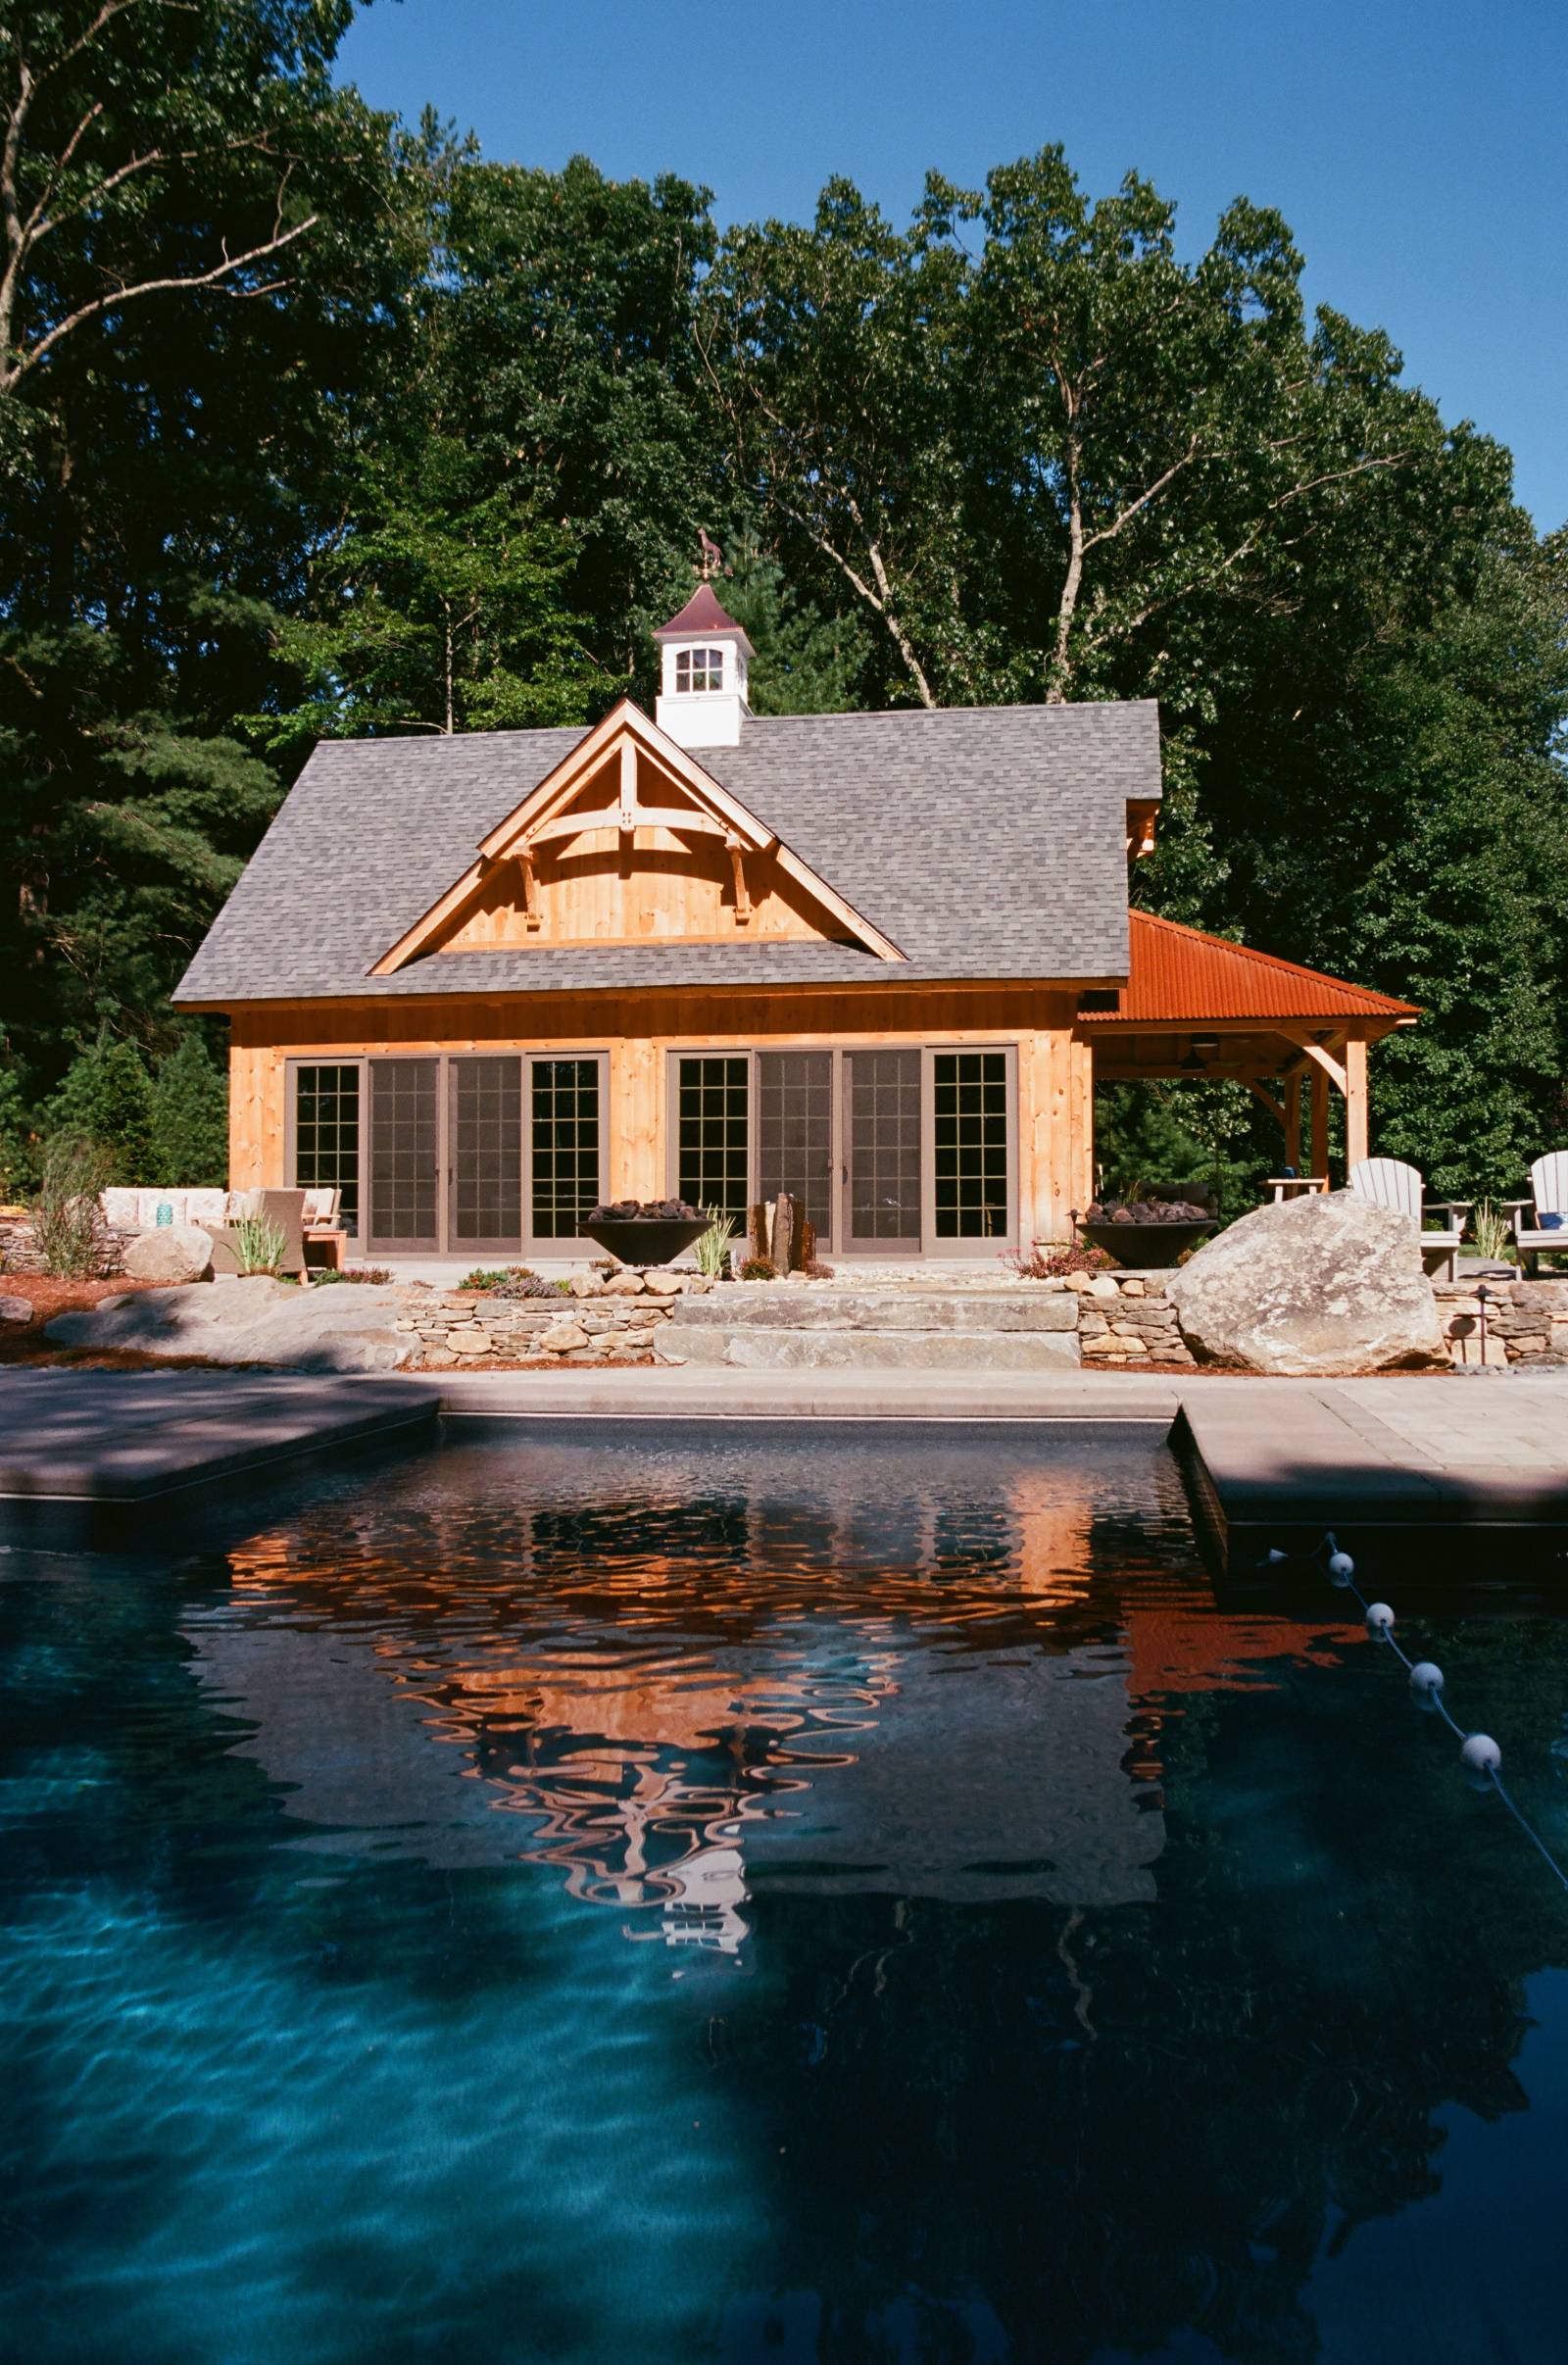 Reflection of the Pool House in the Pool • The Perfect Backyard Escape